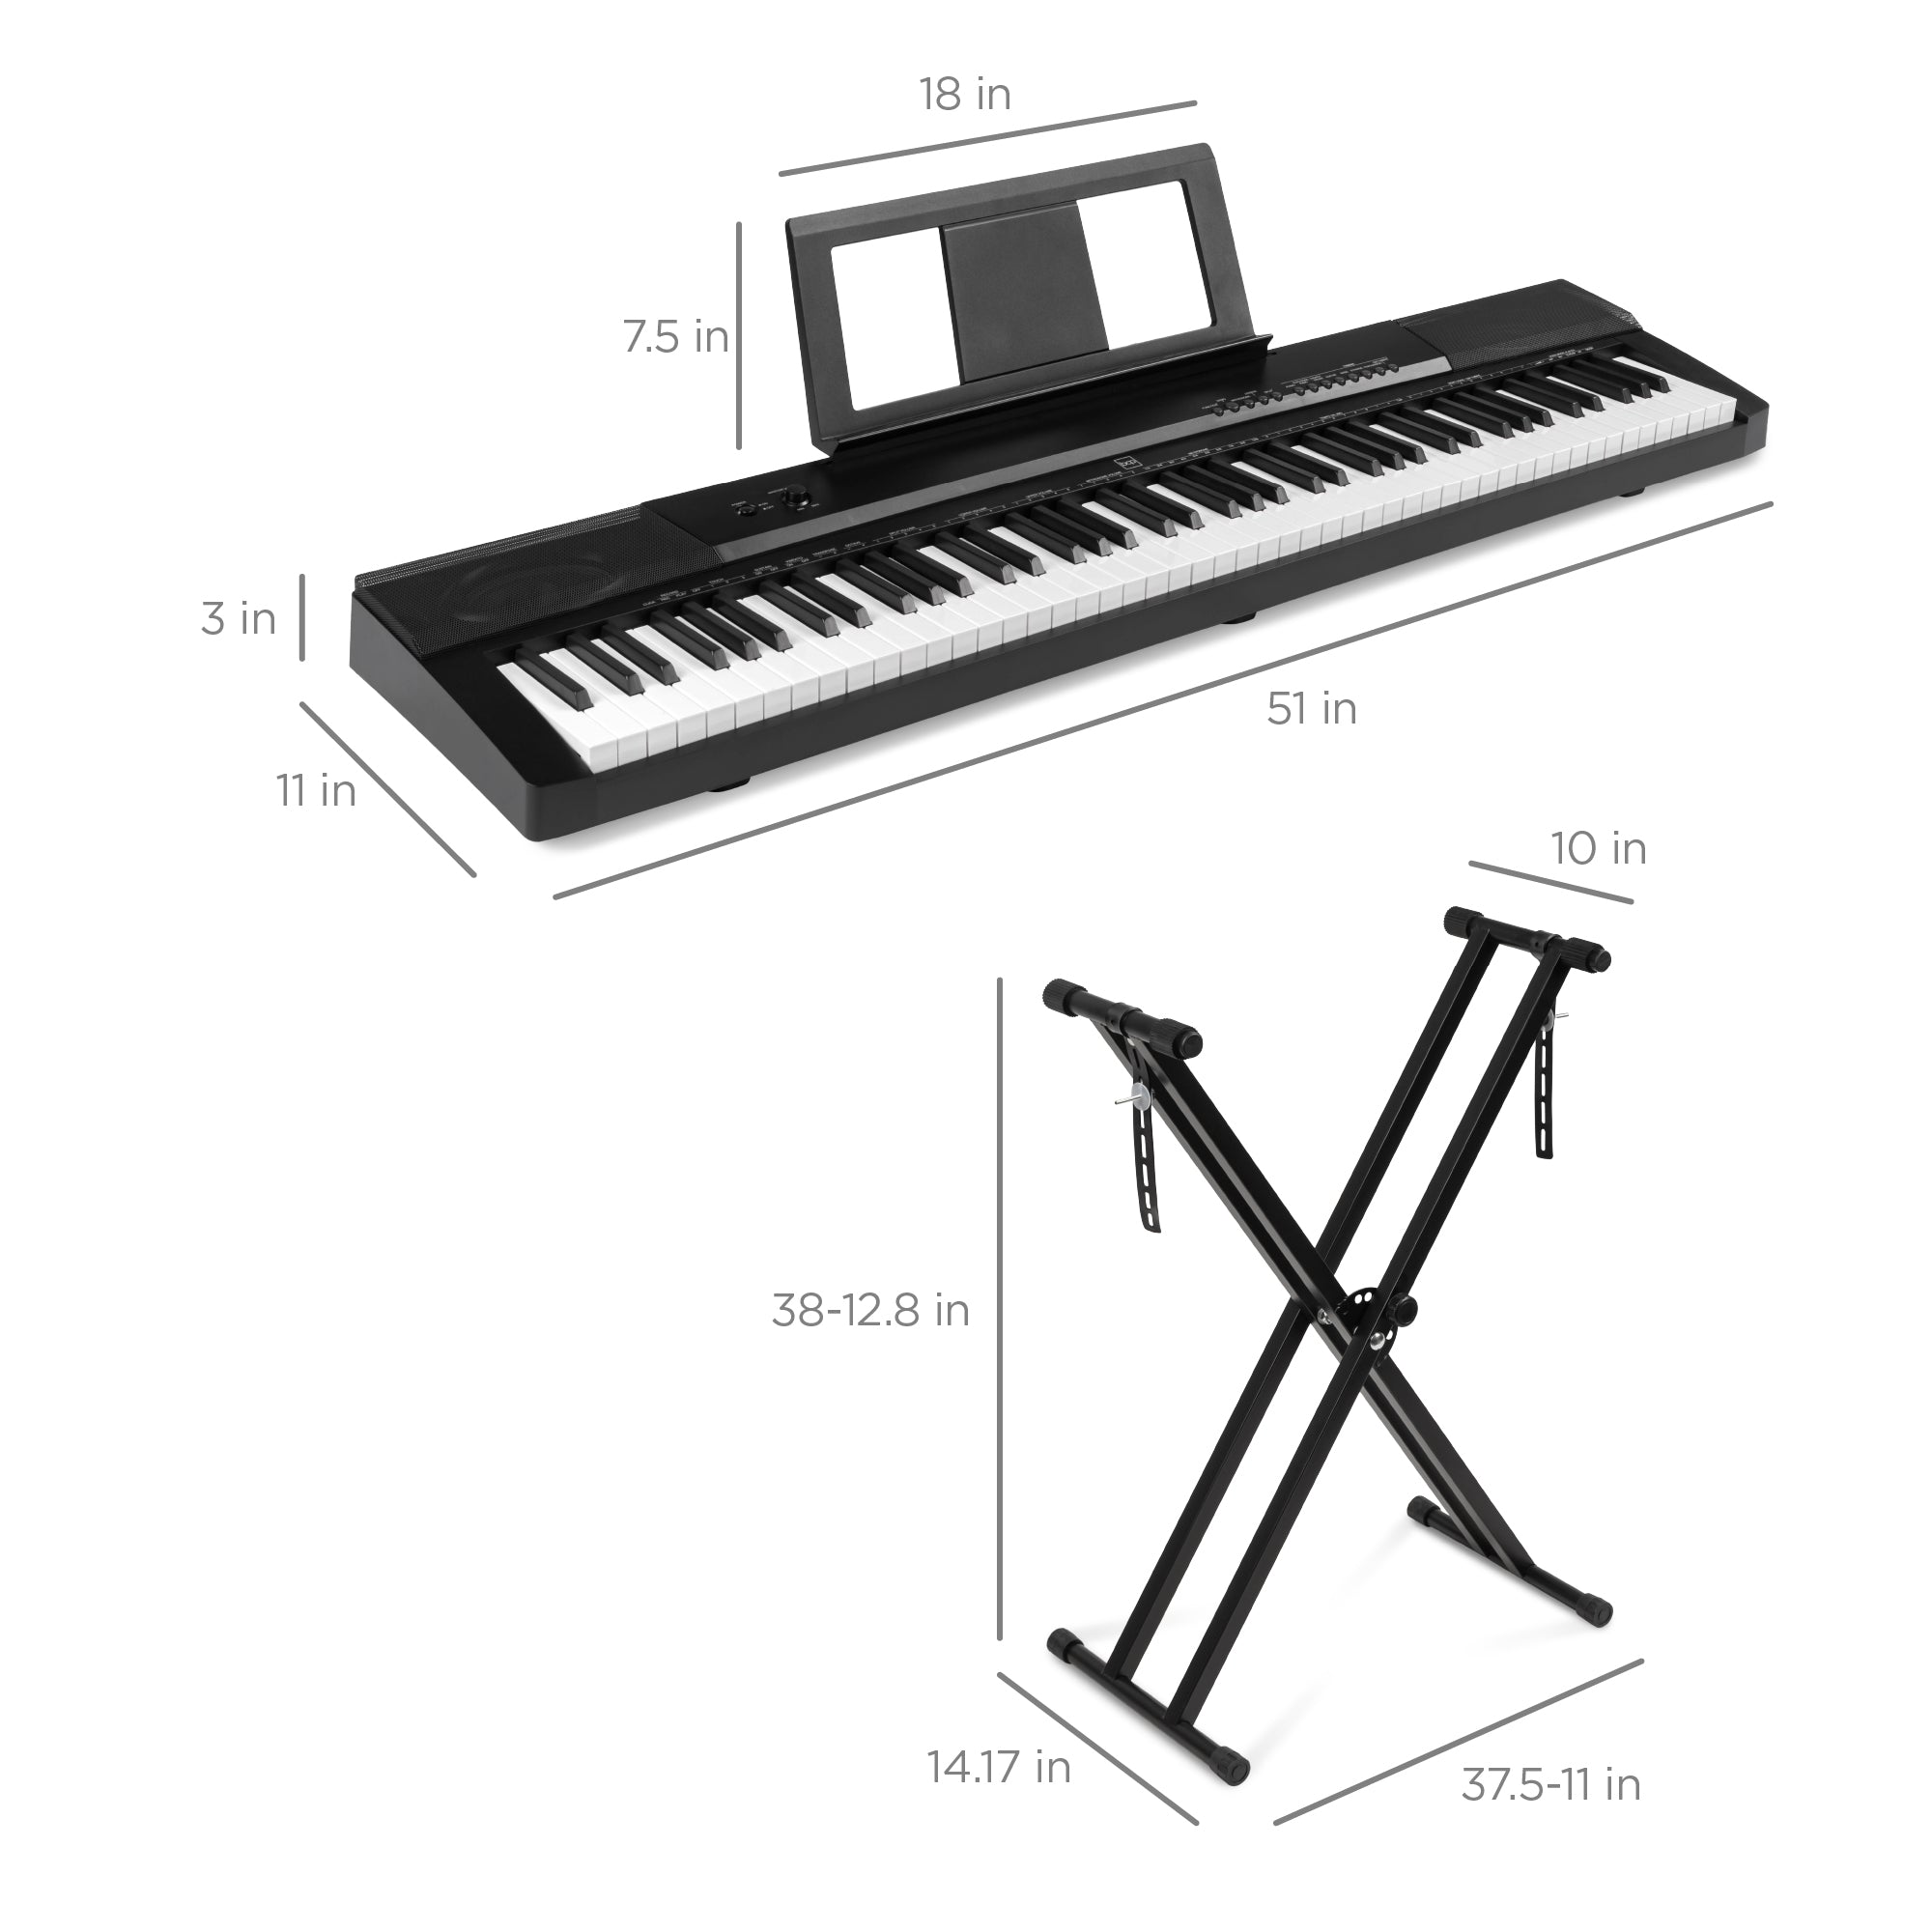 Do you think this stand would hold up a 60lb digital piano? I don't know  what brand it is. : r/DigitalPiano